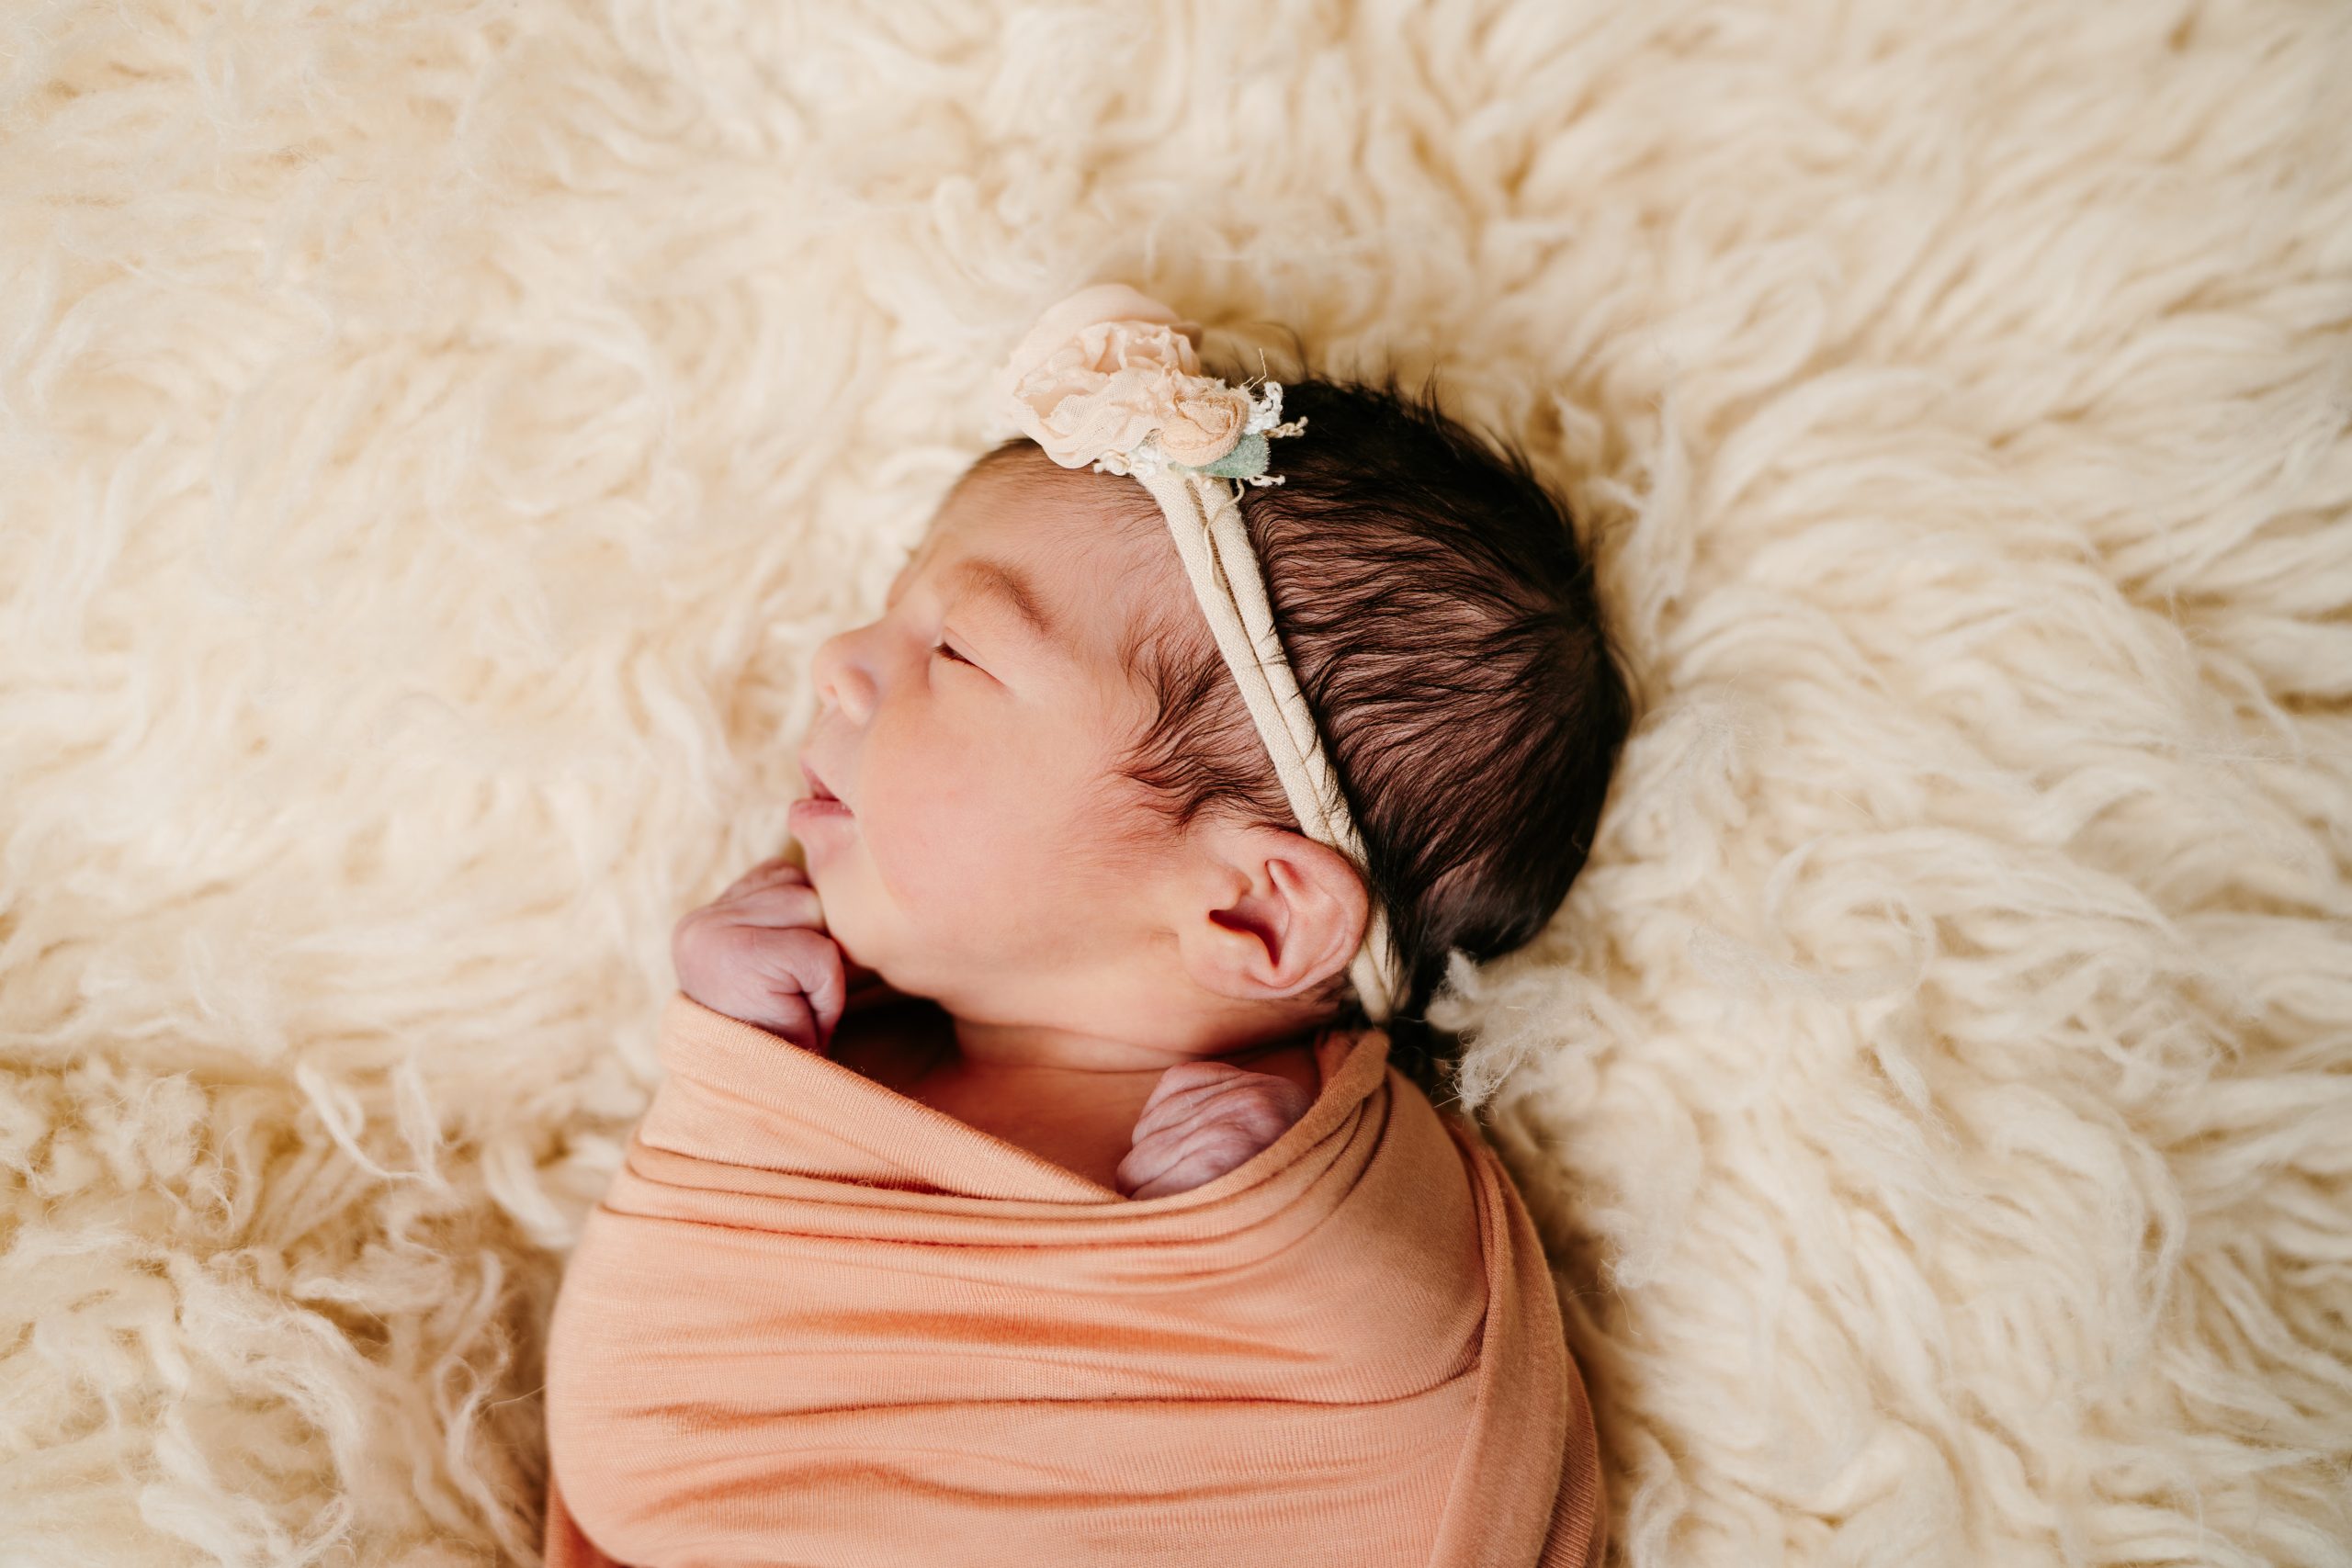 Newborn baby wrapped in a peach colored blanket lying on its side. The baby has dark black hair and is wearing a headband made of peach colored flowers. Her eyes are closed and hands are close to its face.